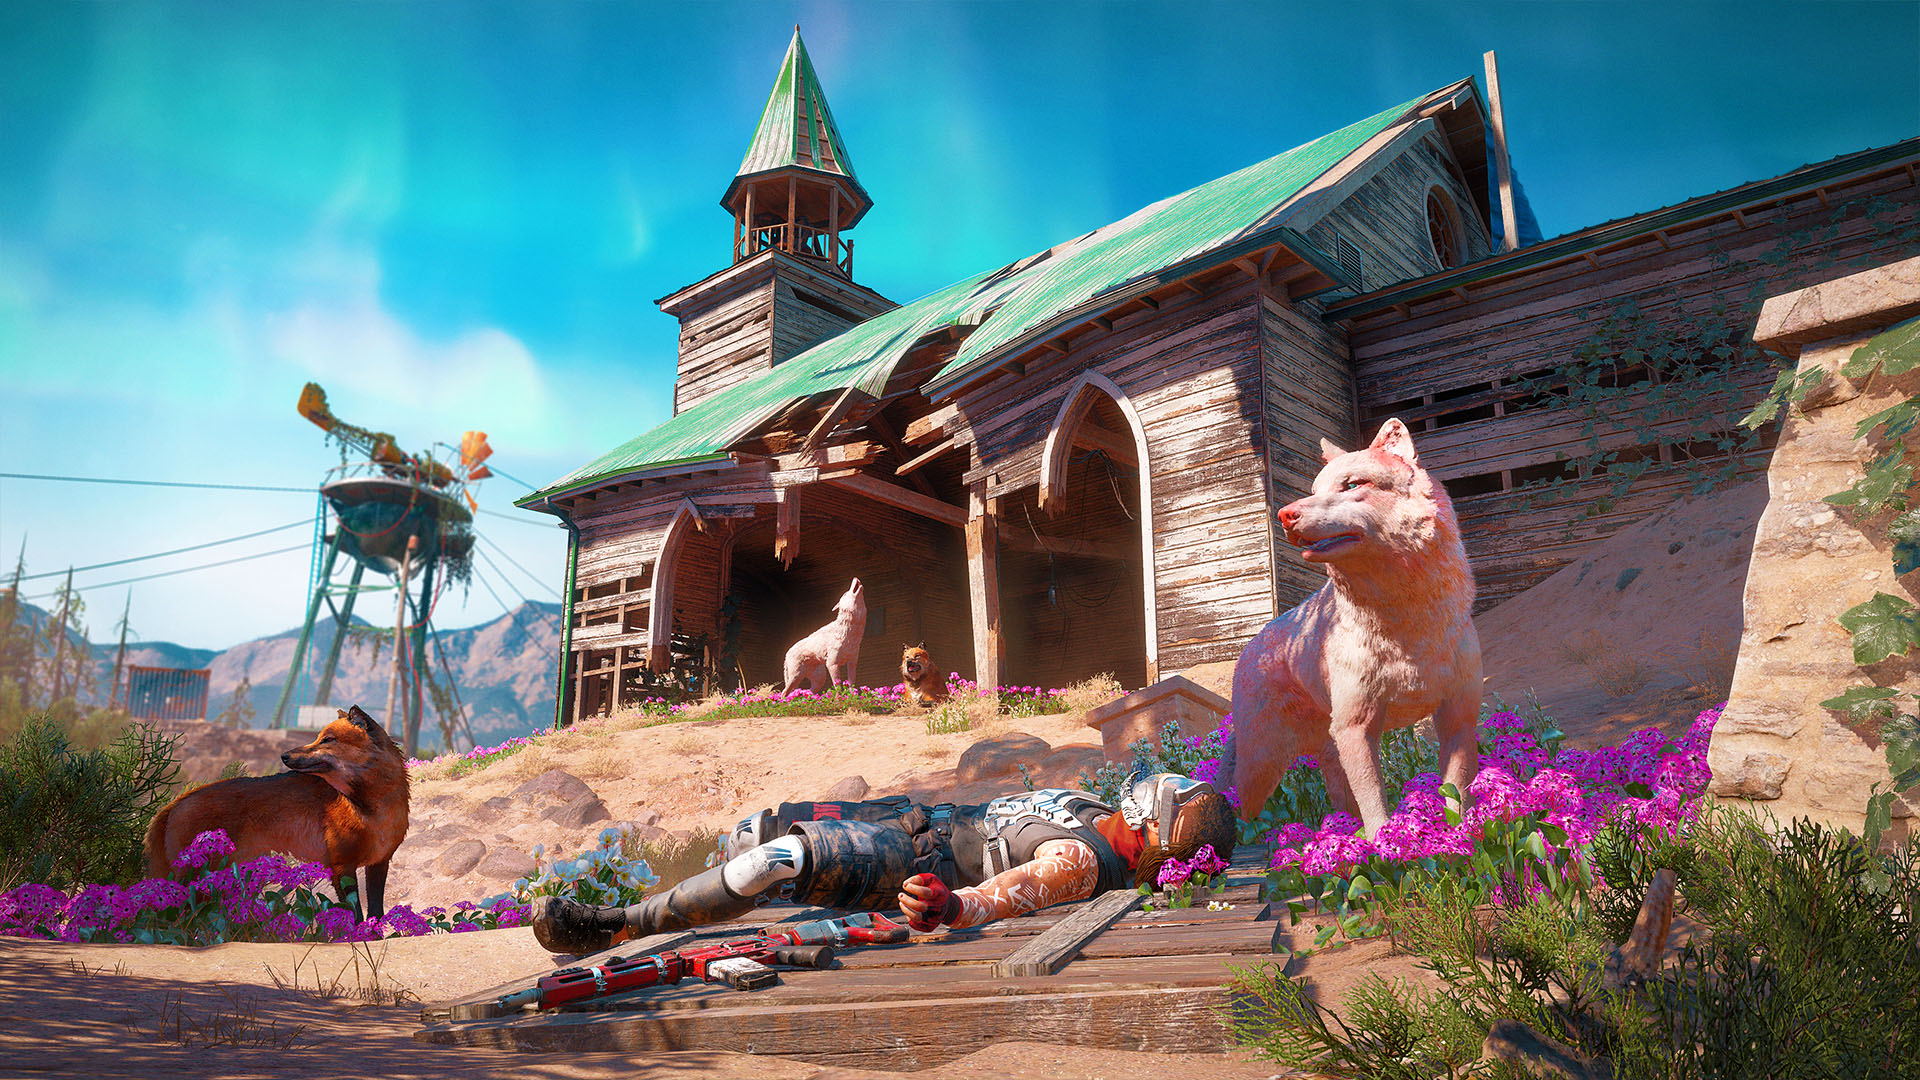 When is the Far Cry 6 Steam release date? - GameRevolution